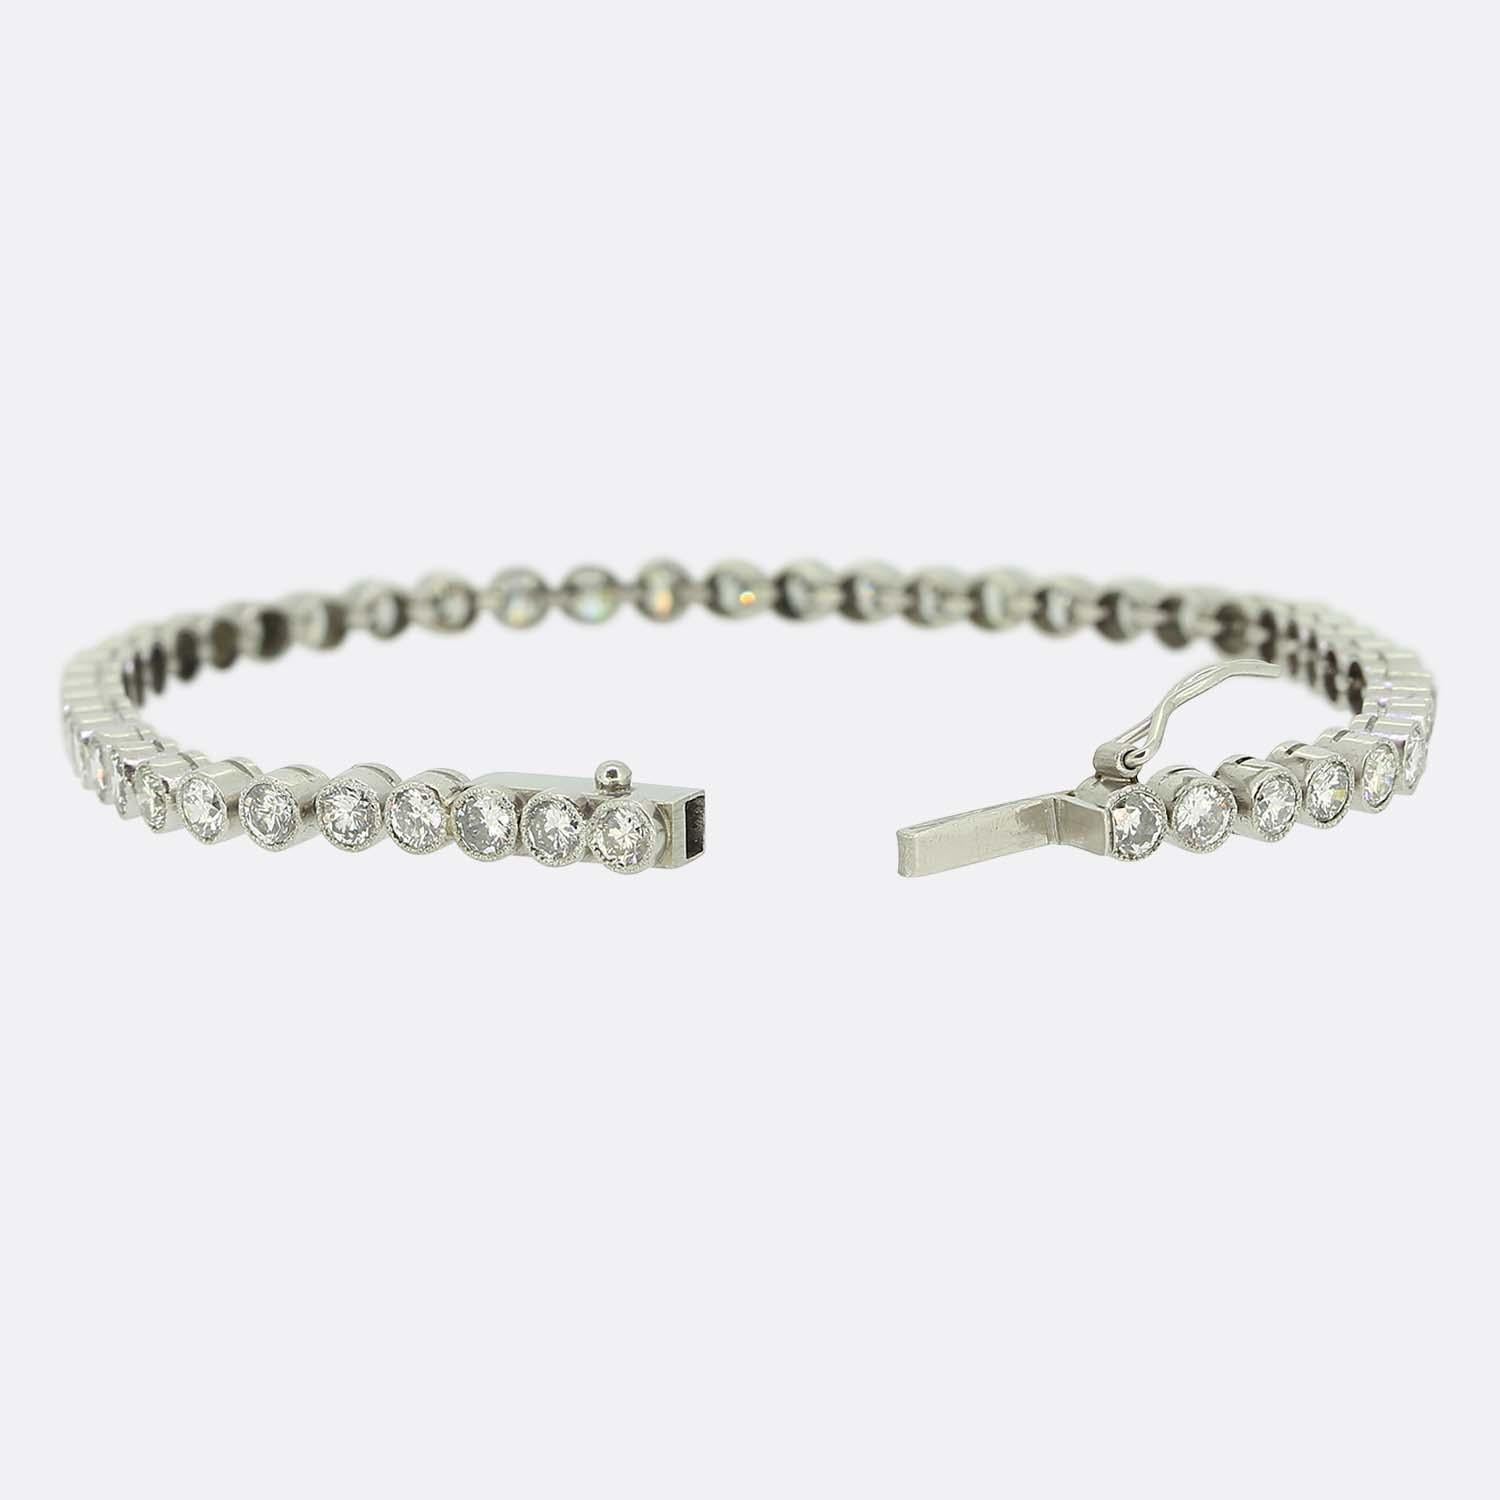 Here we have a delightful diamond line bracelet. This vintage piece has been crafted from platinum and showcases 49 round brilliant cut diamonds in a single line formation. Each bright white stone is well matched to its counterpart whilst being